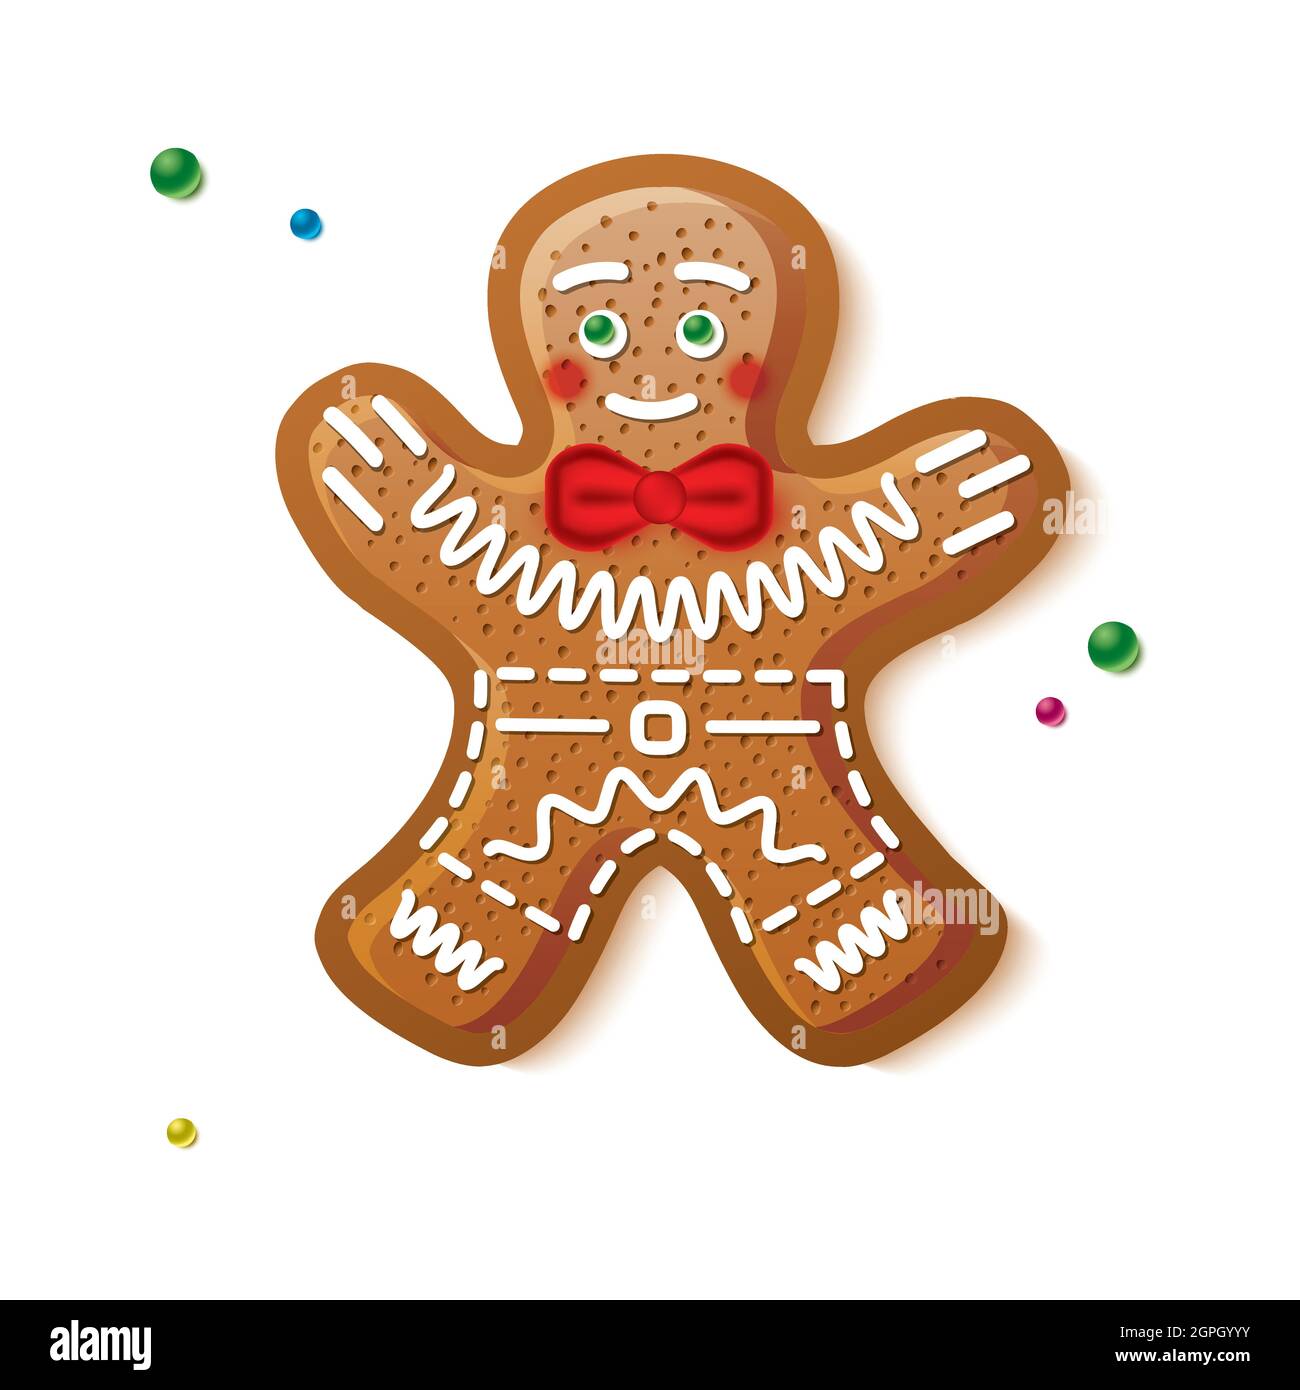 Gingerbread Man Isolated on White. Christmas Cookie. Vector Illustration. Stock Vector